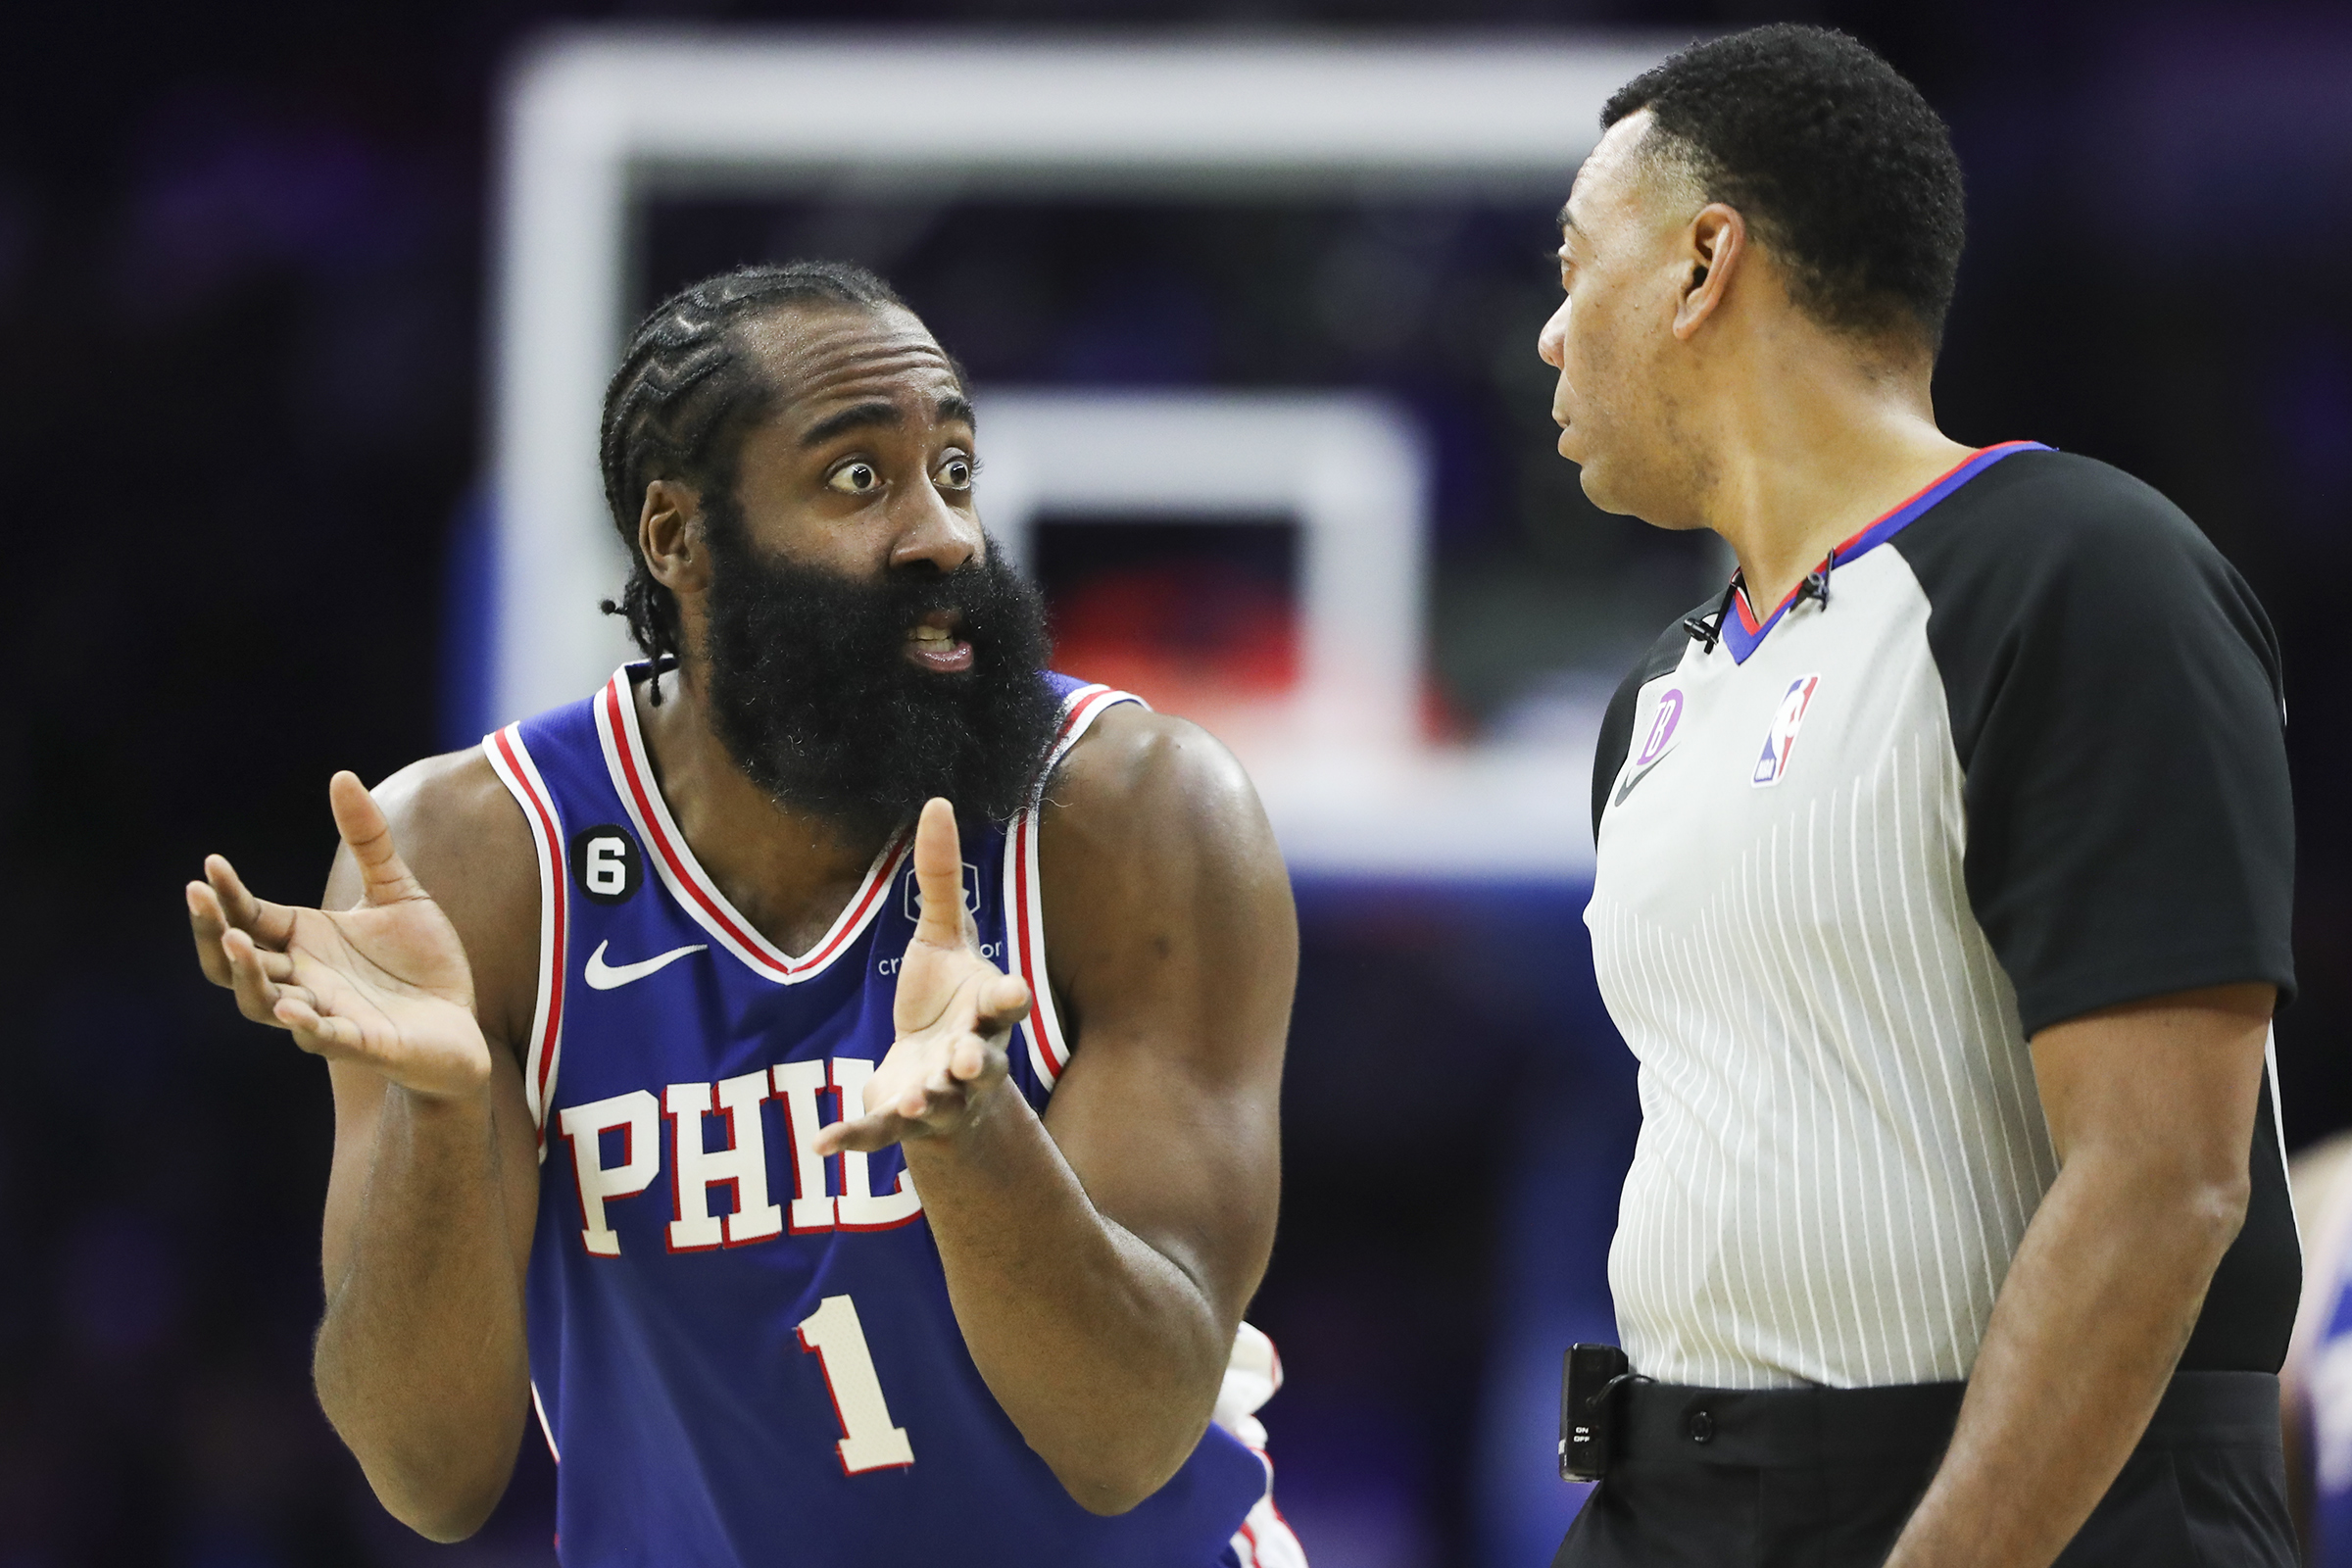 Pressure is on as James Harden saddles in next to another All-Star teammate